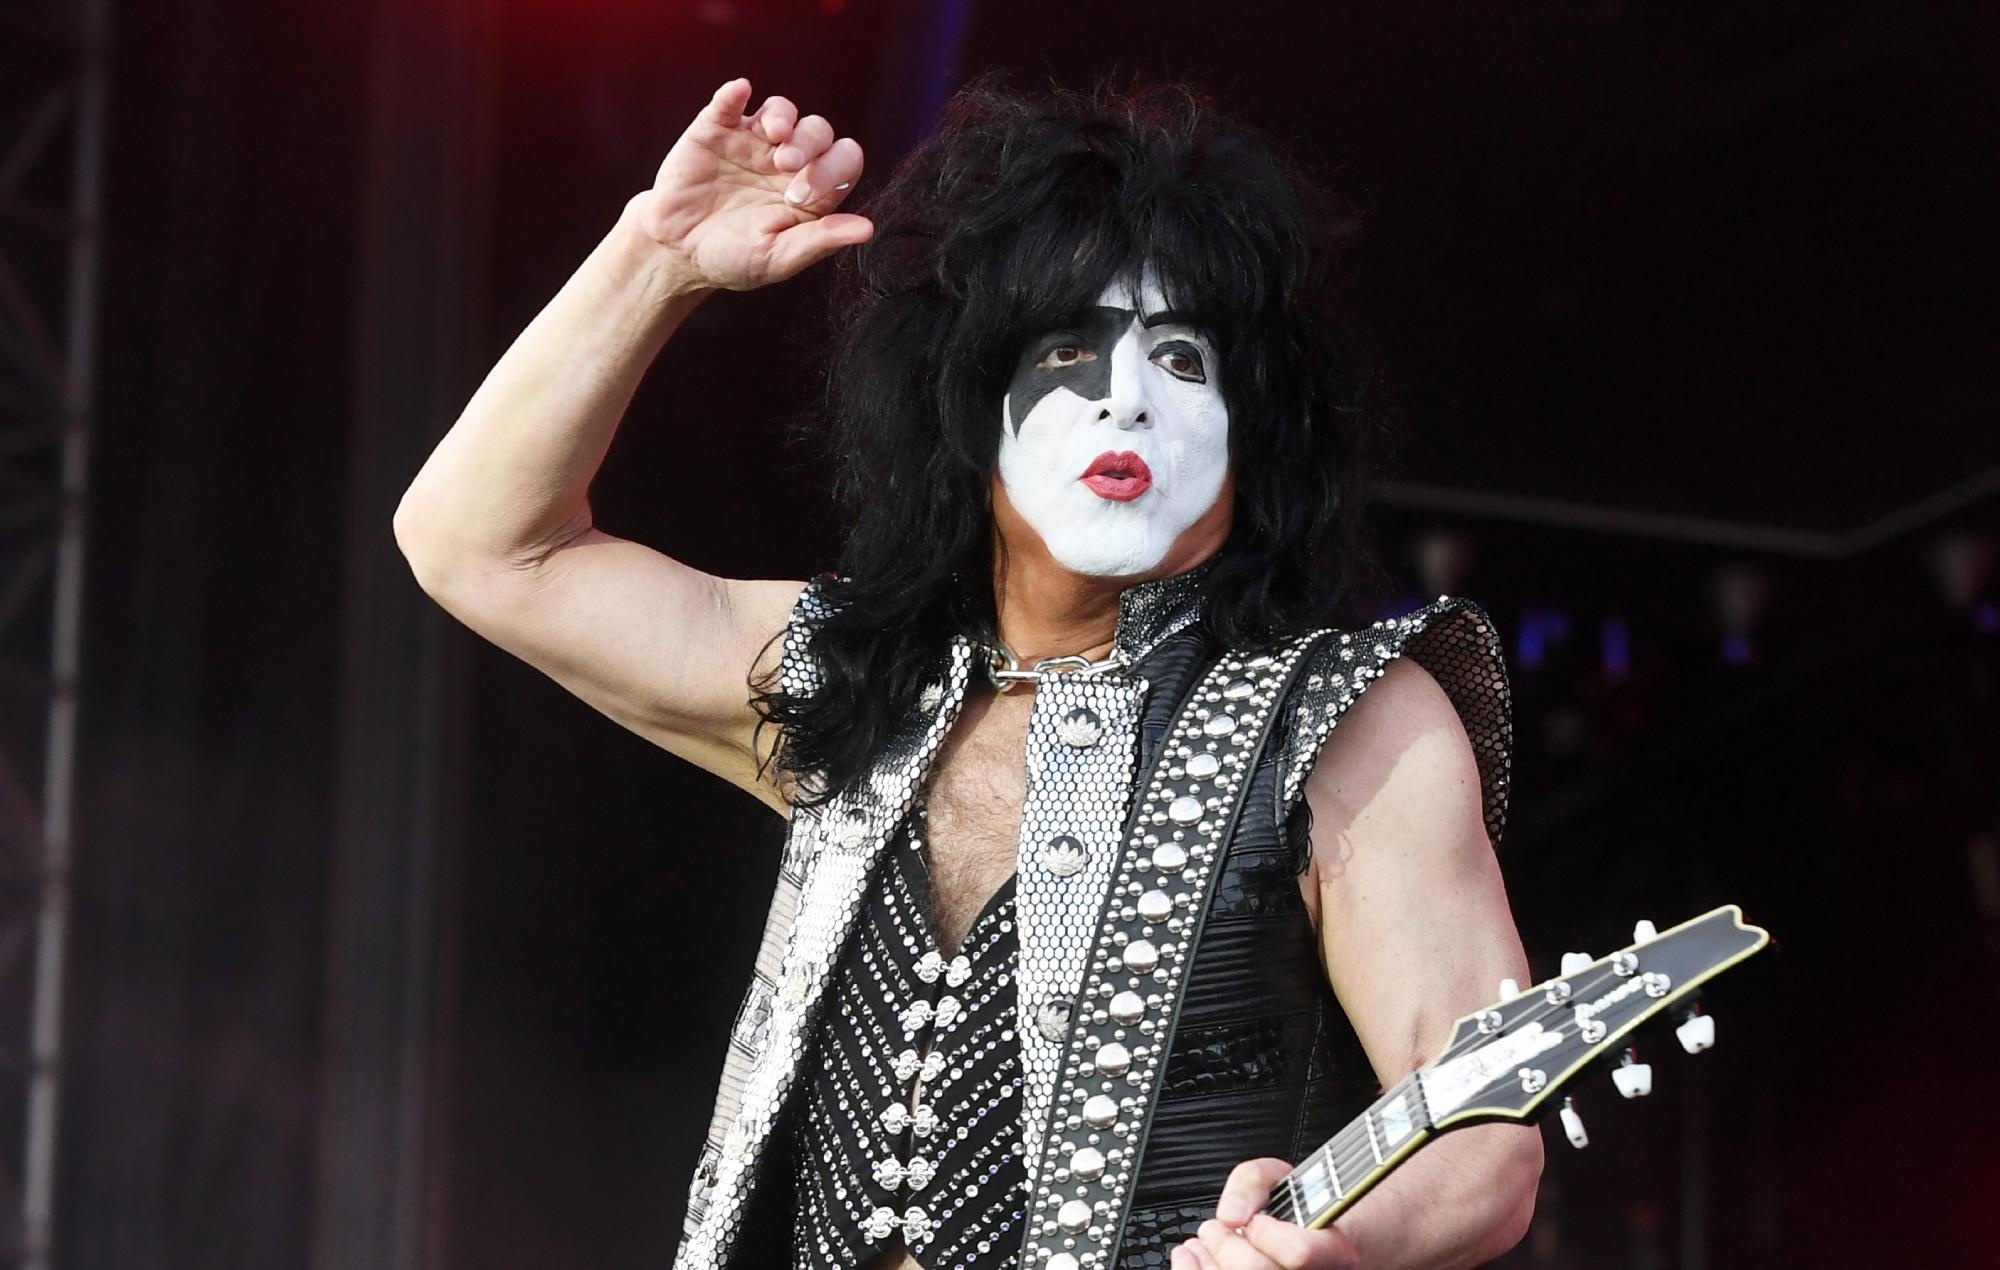 Paul Stanley, Reuniting with Kiss, Band lineup discussion, Rock and Roll reunion, 2000x1270 HD Desktop